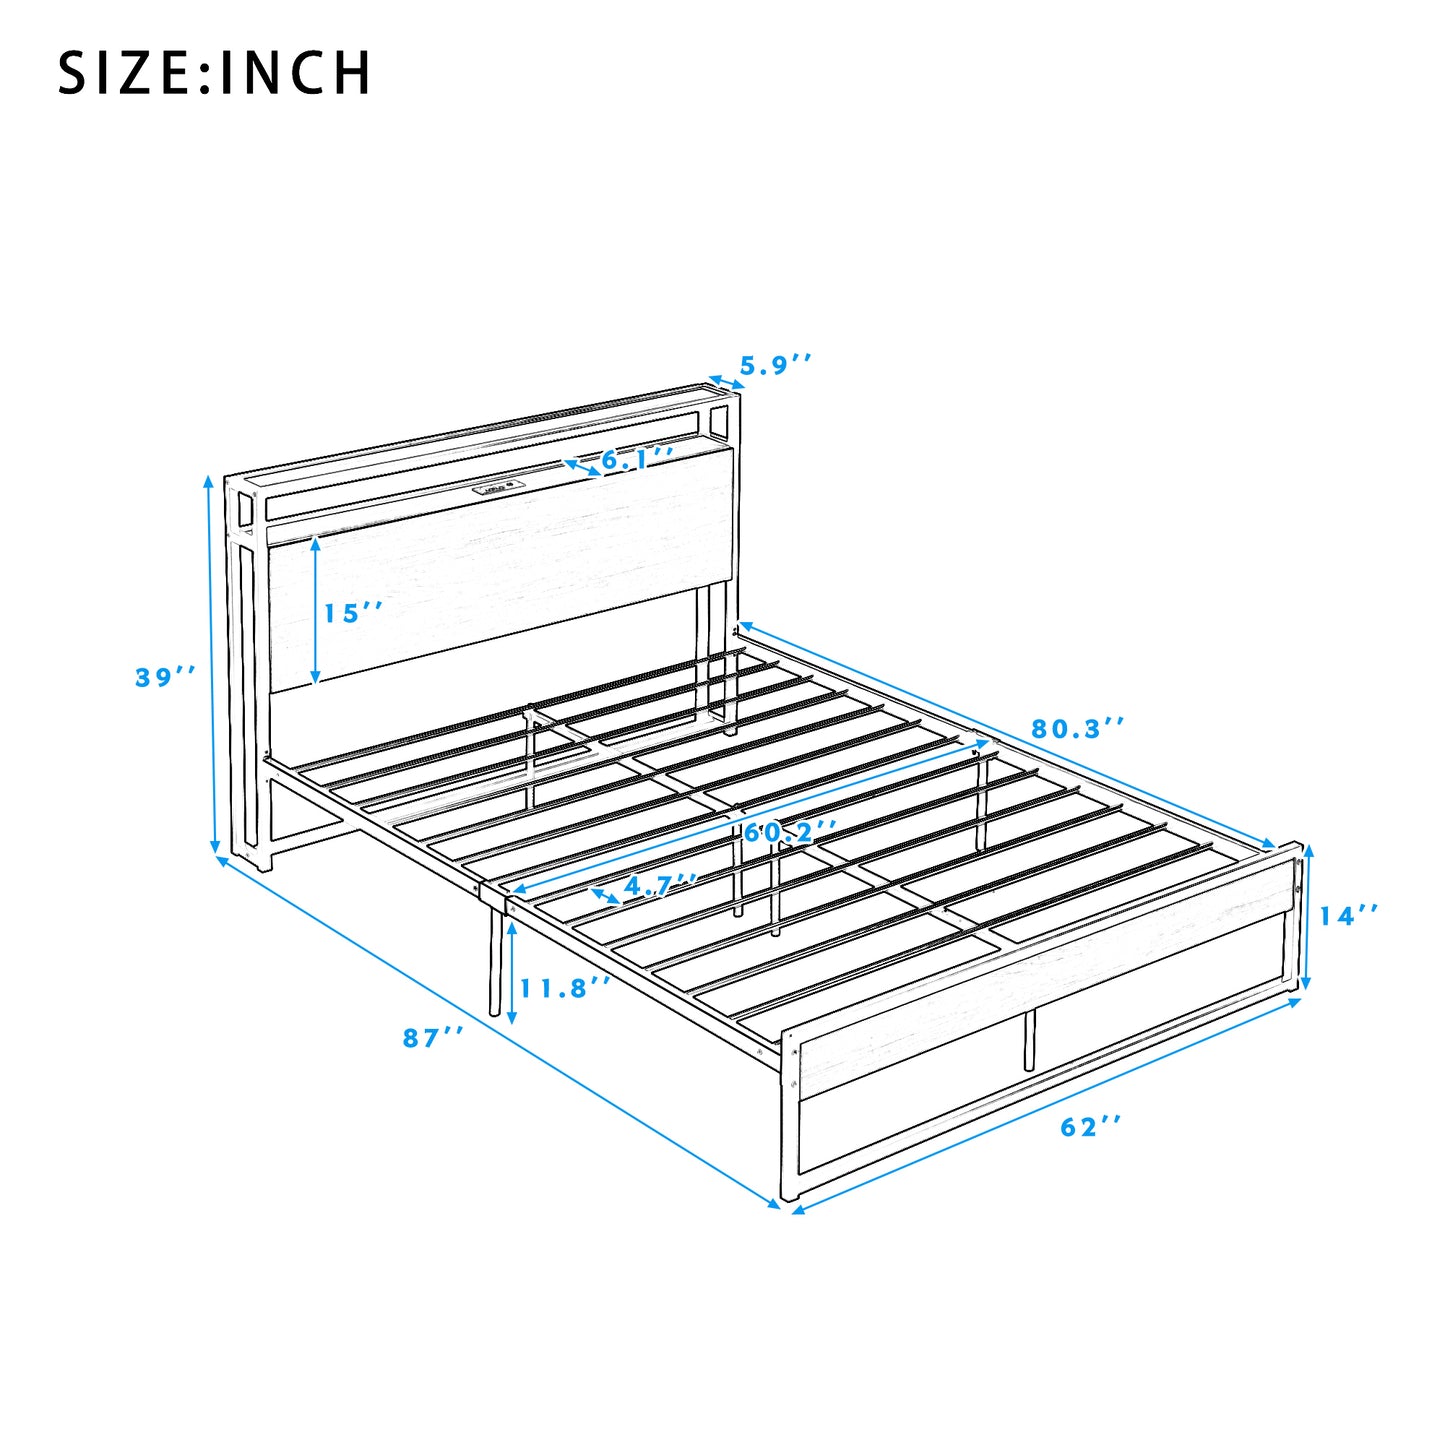 Queen Size Metal Platform Bed Frame with Sockets, USB Ports and Slat Support ,No Box Spring Needed Black